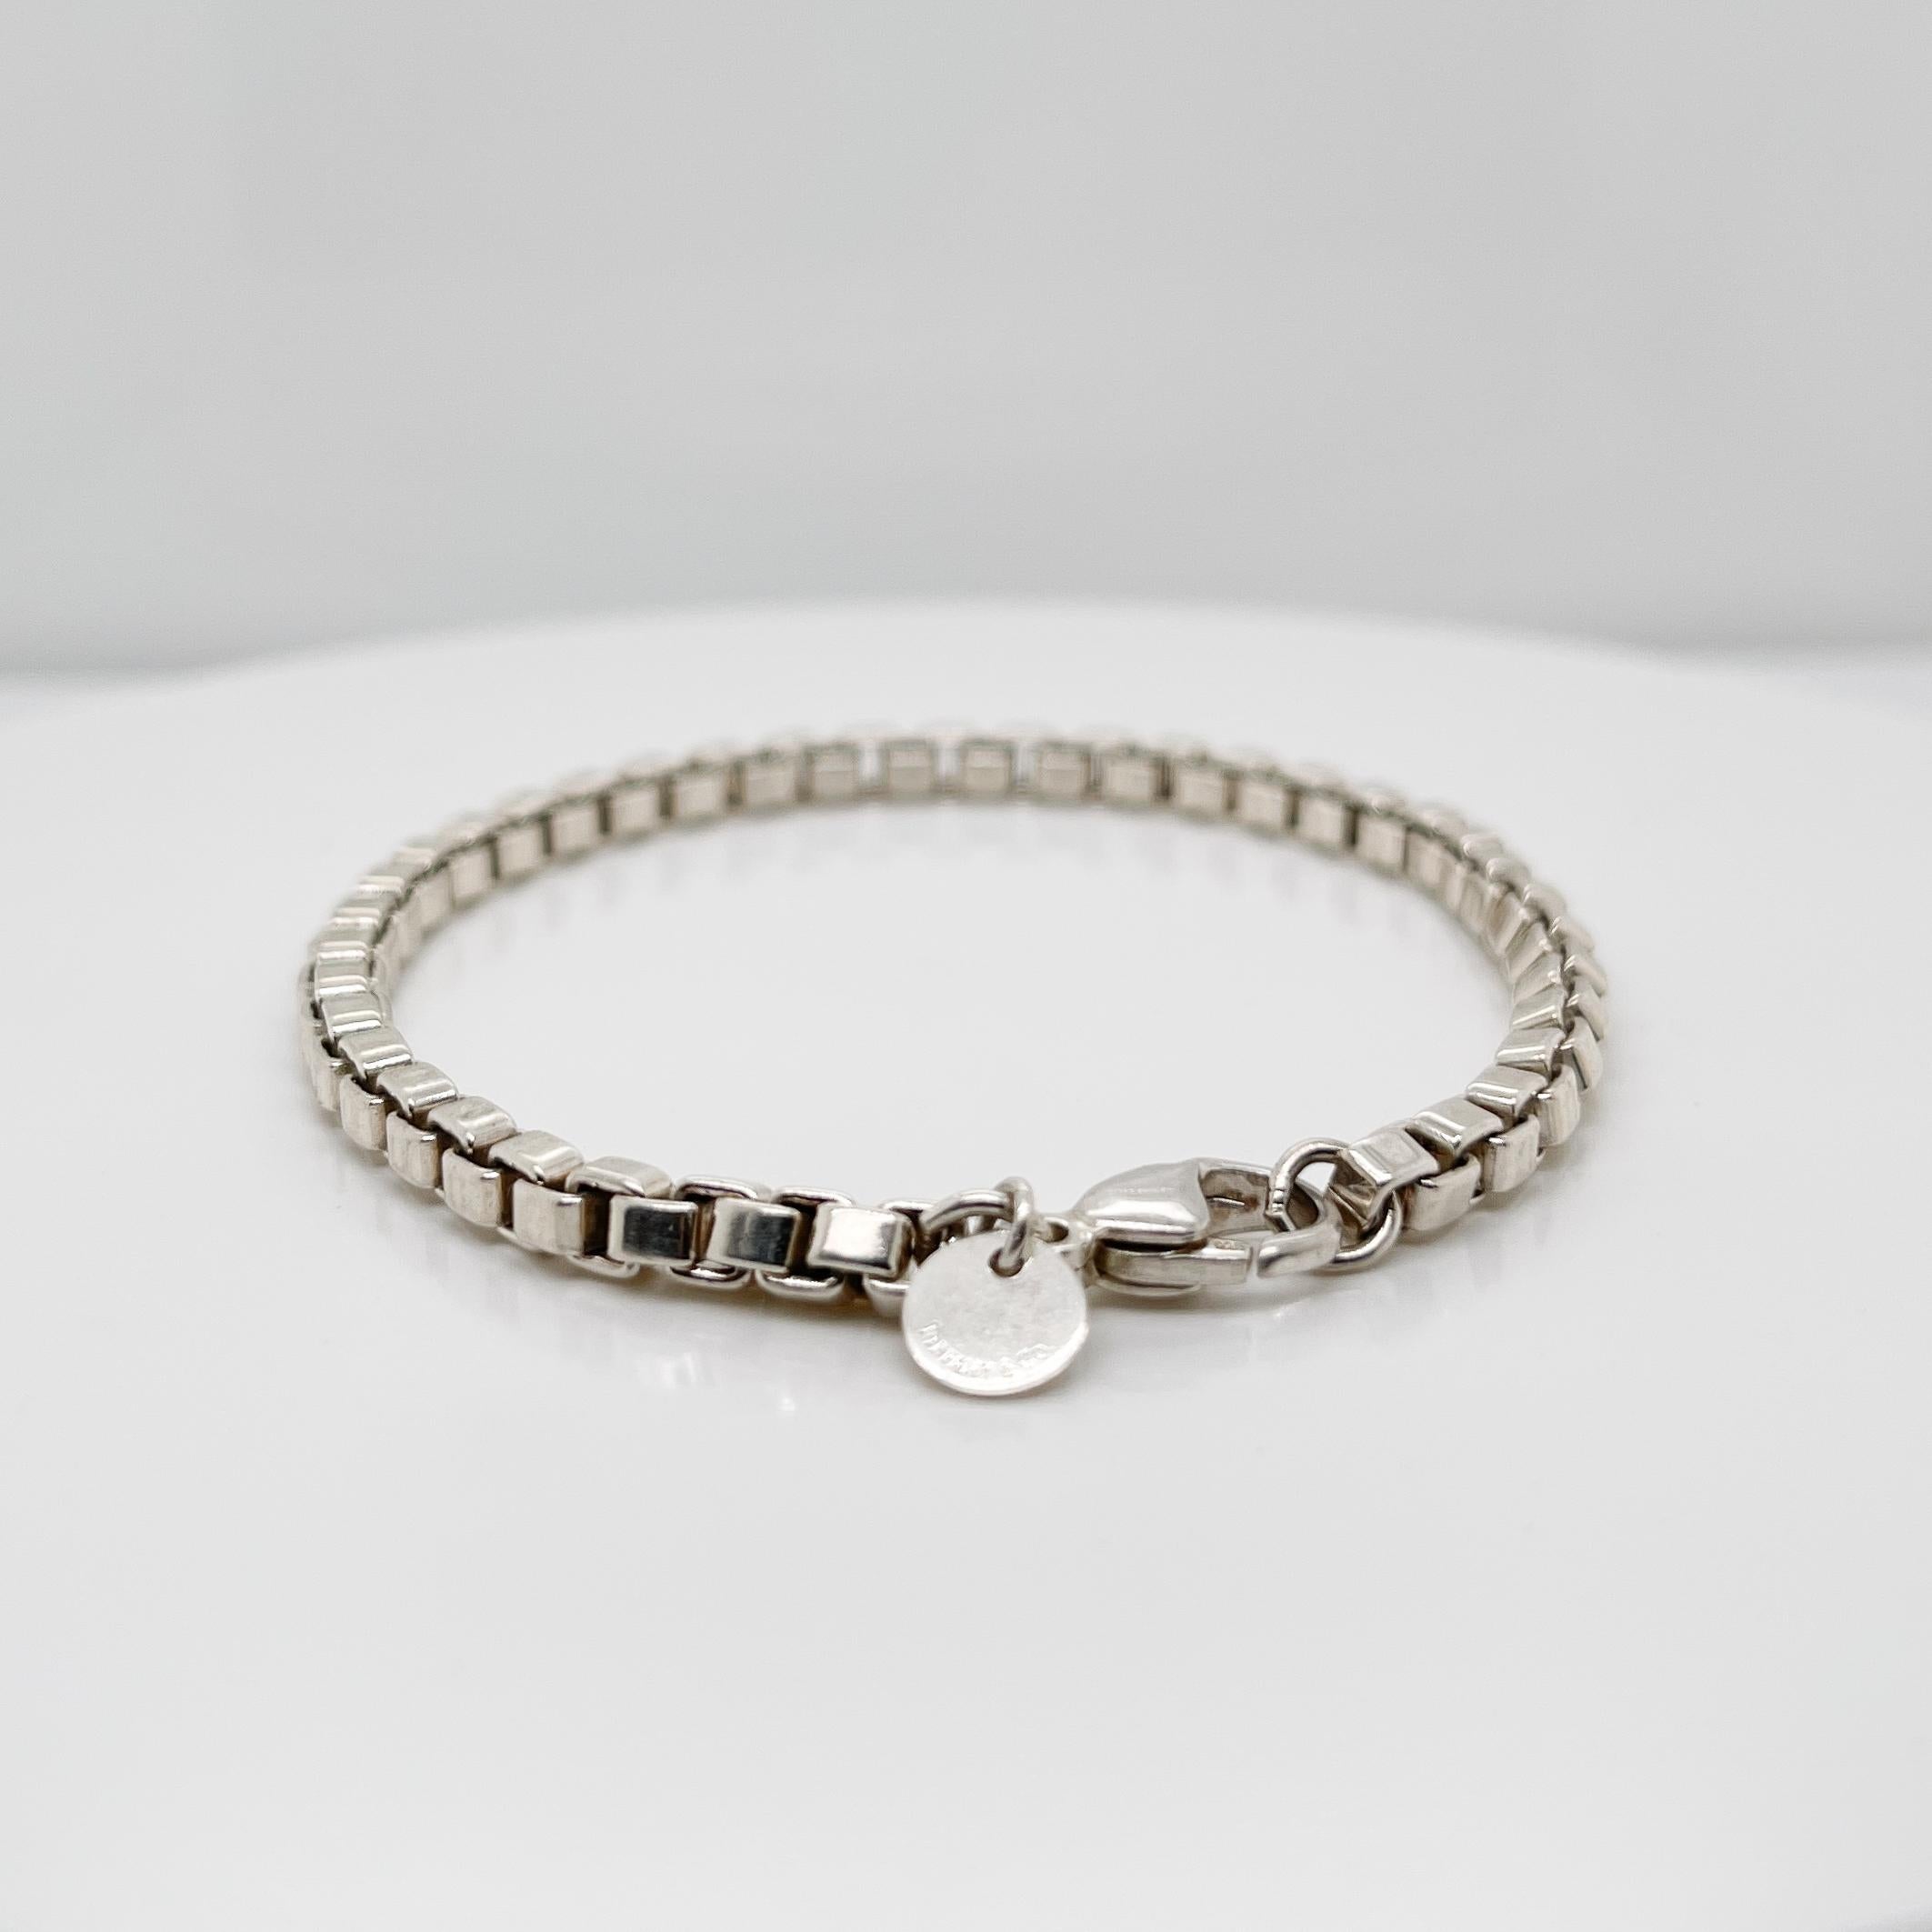 A fine Tiffany & Co. Venetian box link bracelet.

In sterling silver.

Classic Tiffany design!

Date:
20th Century

Overall Condition:
It is in overall good, as-pictured, used estate condition with some very fine & light surface scratches and other